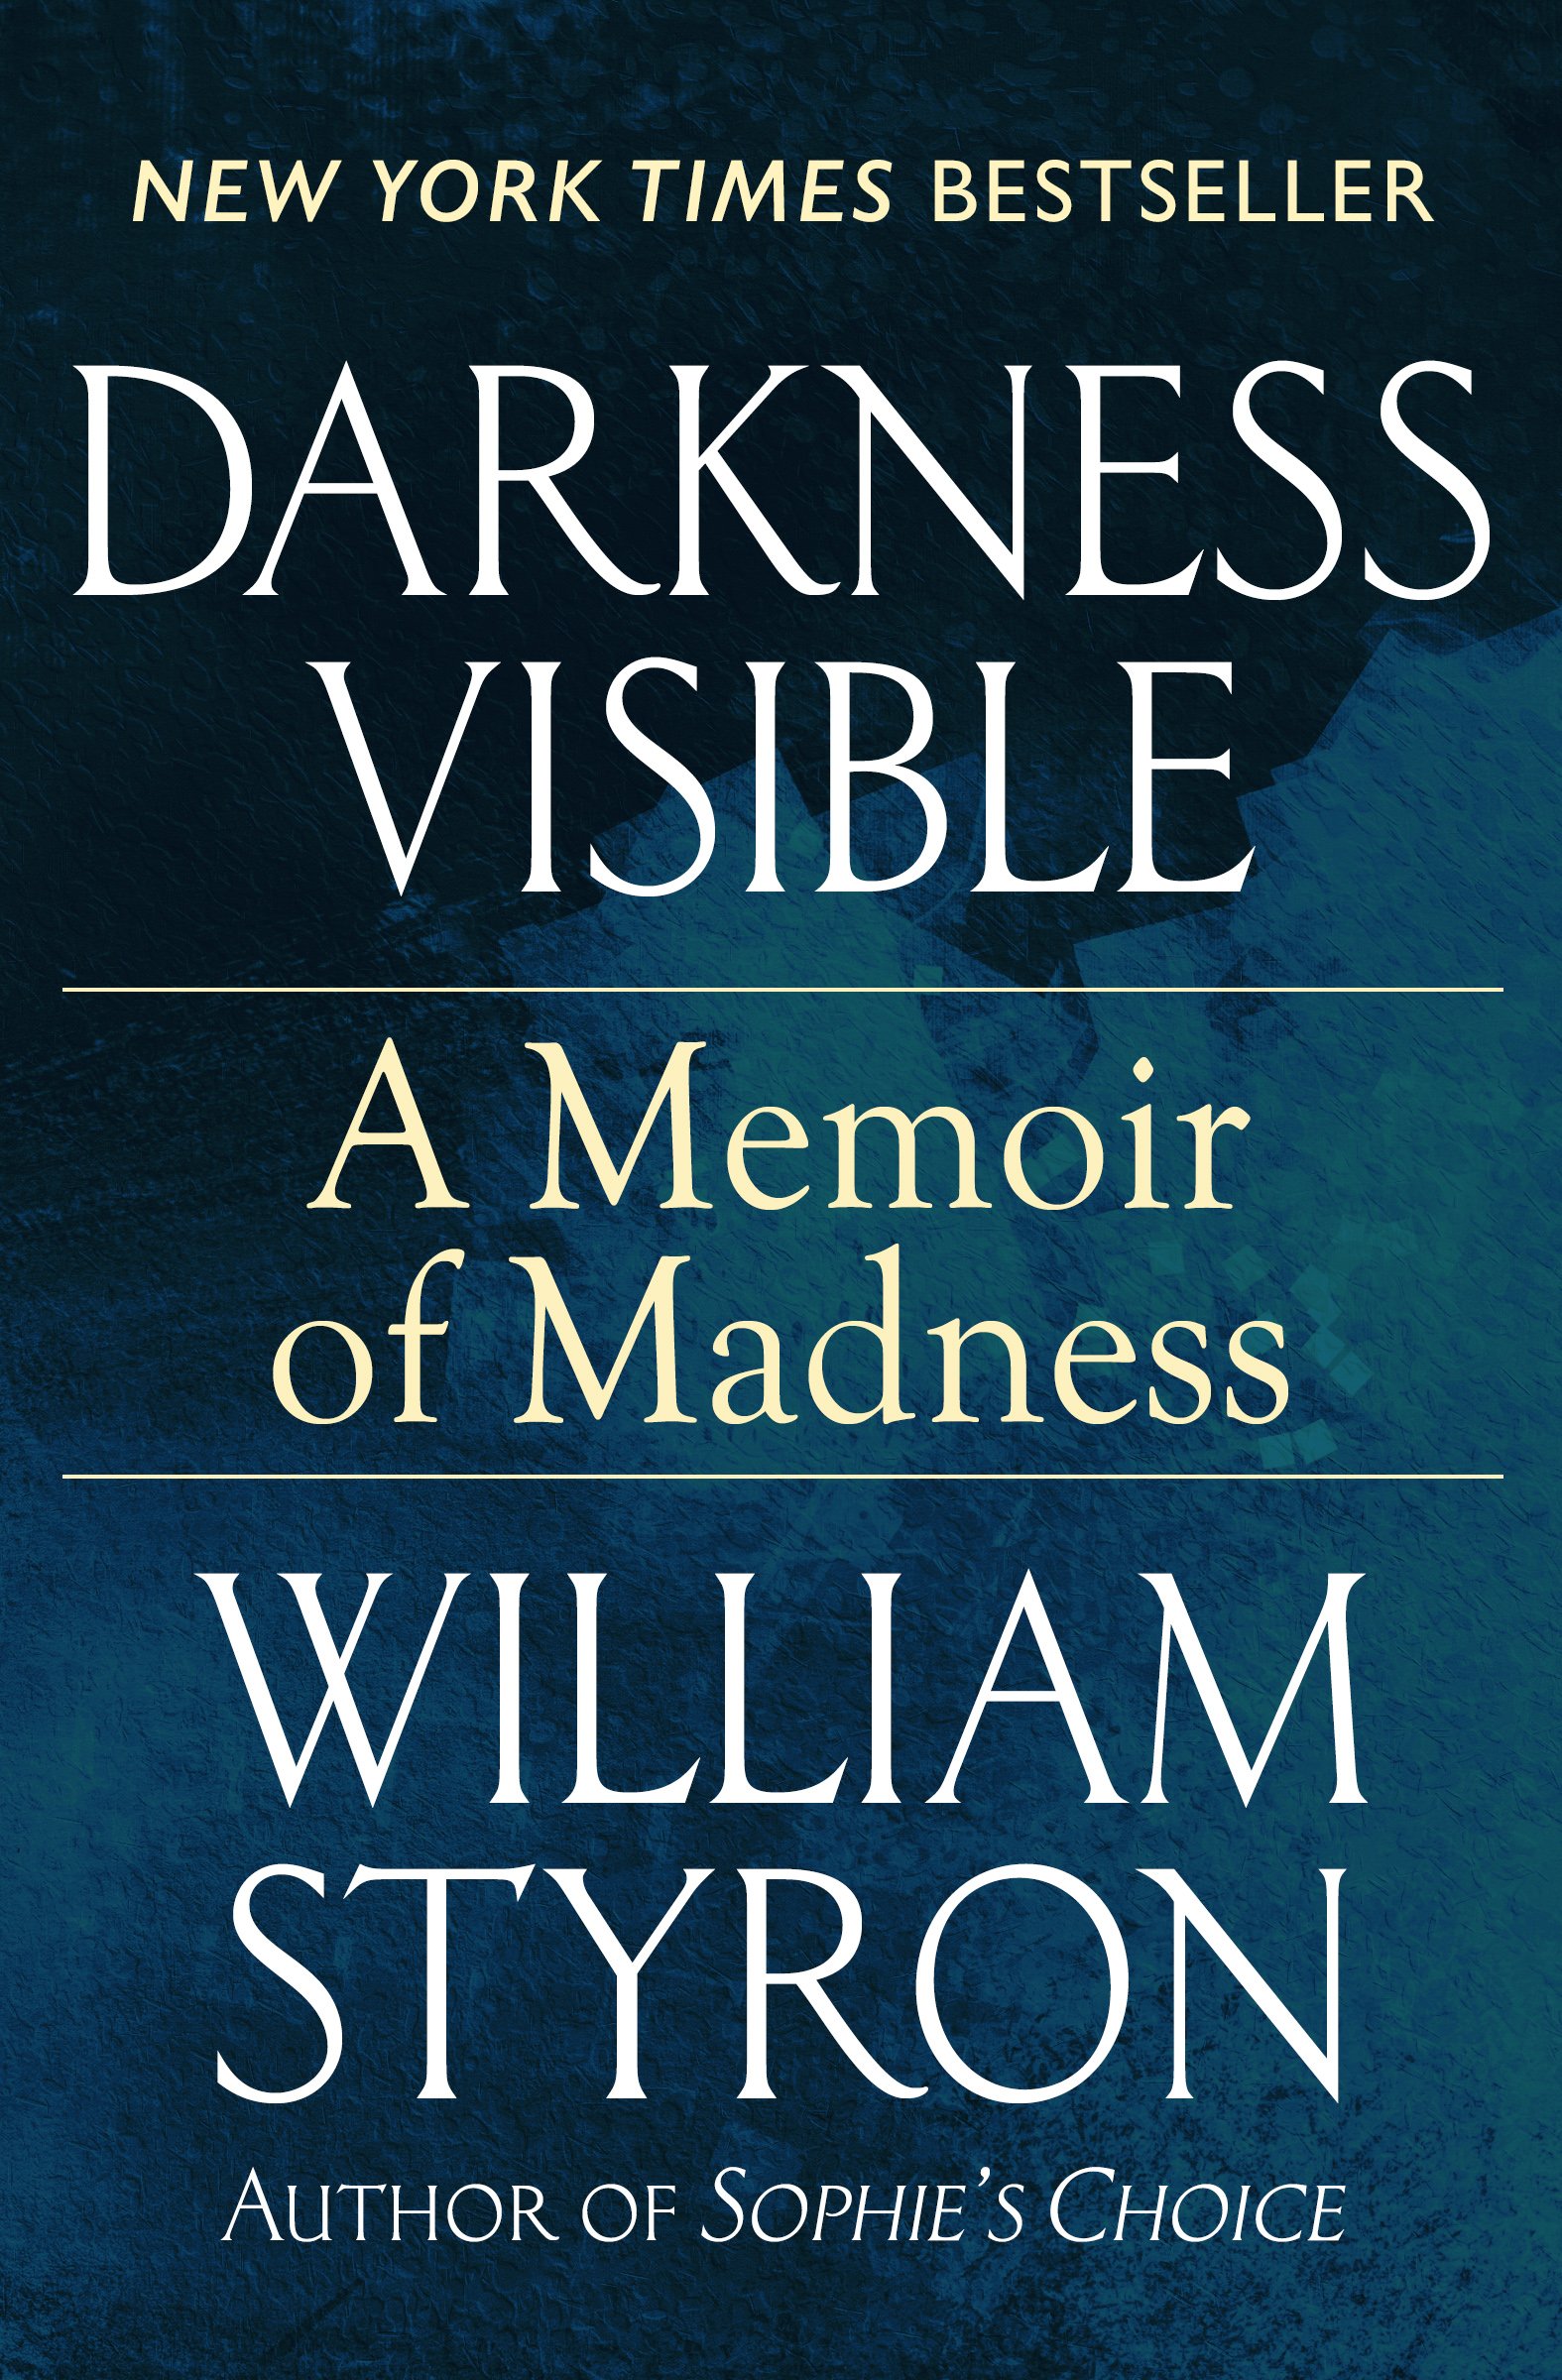 Darkness Visible: A Memoir of Madness (Kindle eBook) by William Styron $3.99